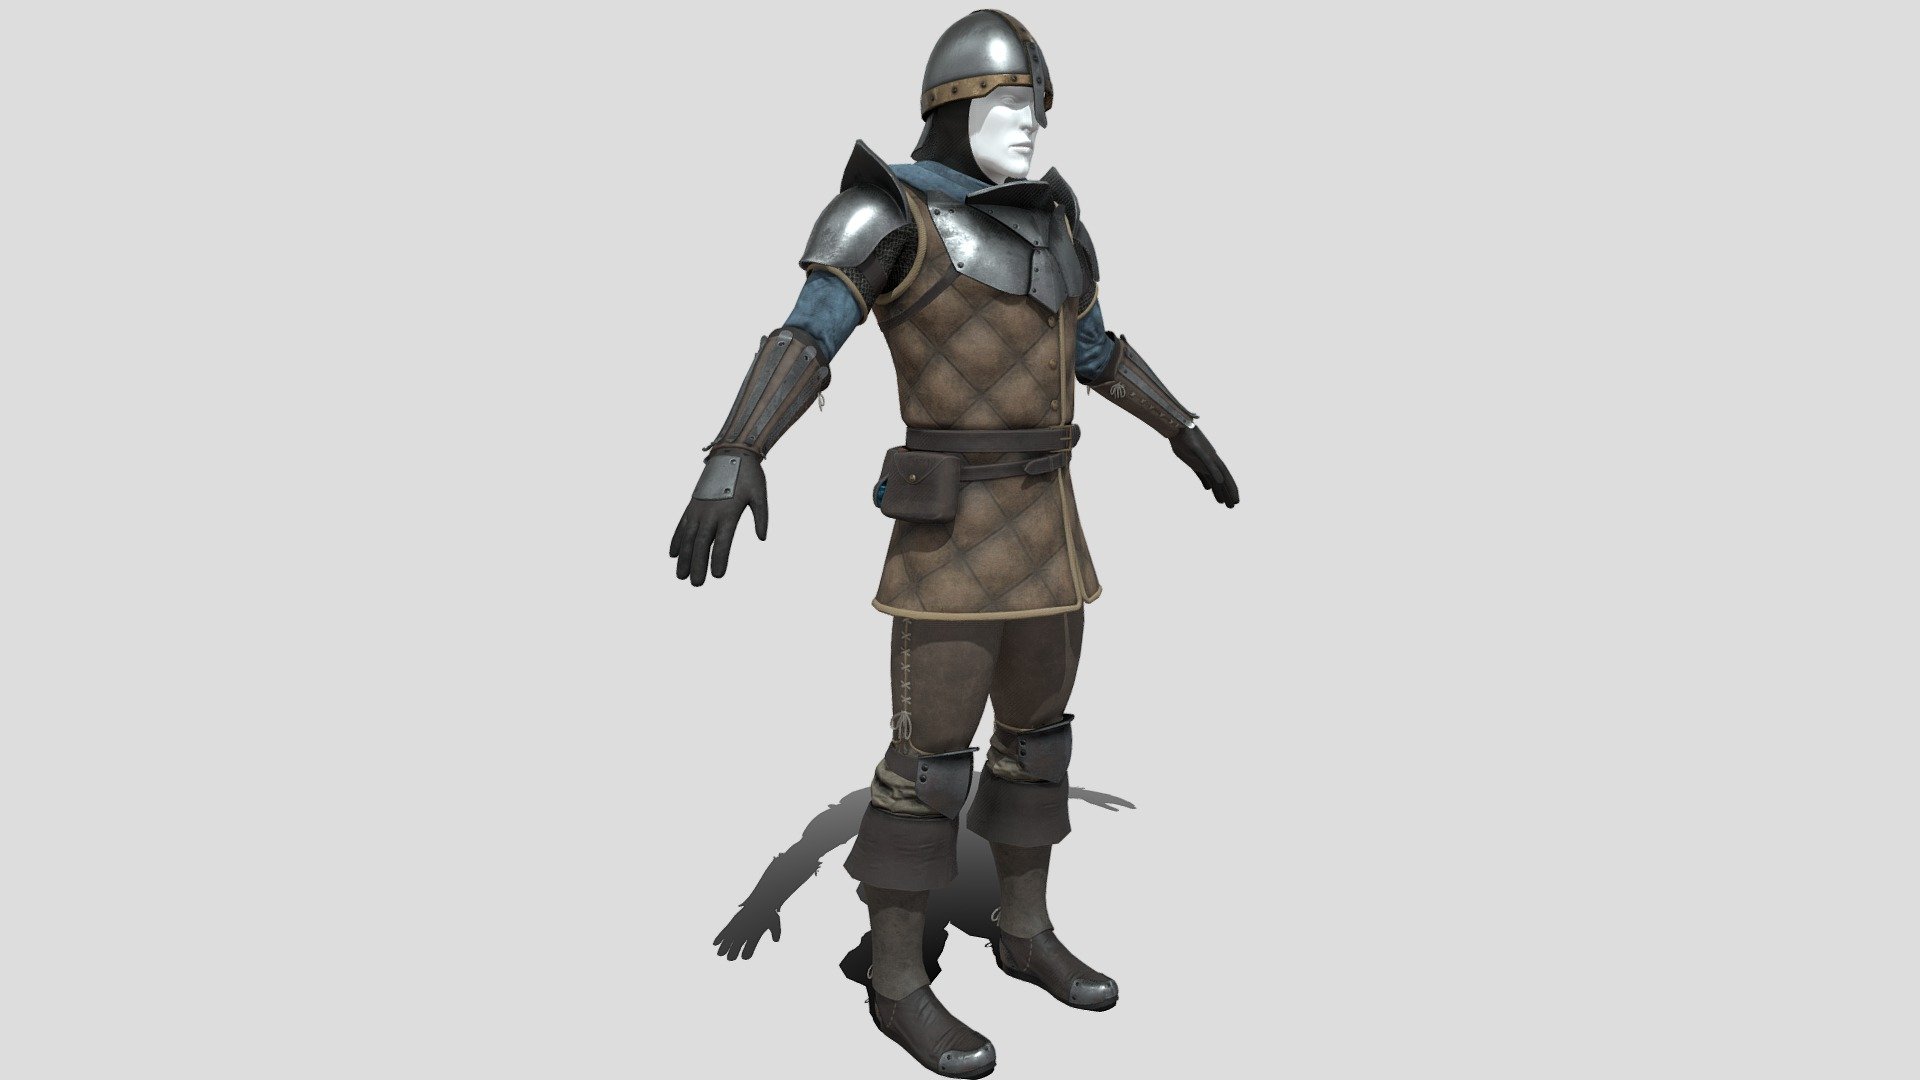 Basic armor made for a side project, the armor is to be semi-modular, additional armor elements can be replaced with another of the same type of armor, for example: Shoulders, Bracers, greaves, a breastplate can be replaced with parts from another armor set of the same type . that's why I decided to make several texture sets. It seems to me that if I had armor on a single large texture and I would only replace, for example, bracers from another set of armor, the engine would have to load 2 sets of 2-4k texture anyway, which I think could cause optimization problems as if each element was from a different set and the engine would have to load 5-10 texture sets of 2-4k each. well, if there's another more efficient method, I'd love to hear about it - Light Infantry Armor - 3D model by Groszeks 3d model